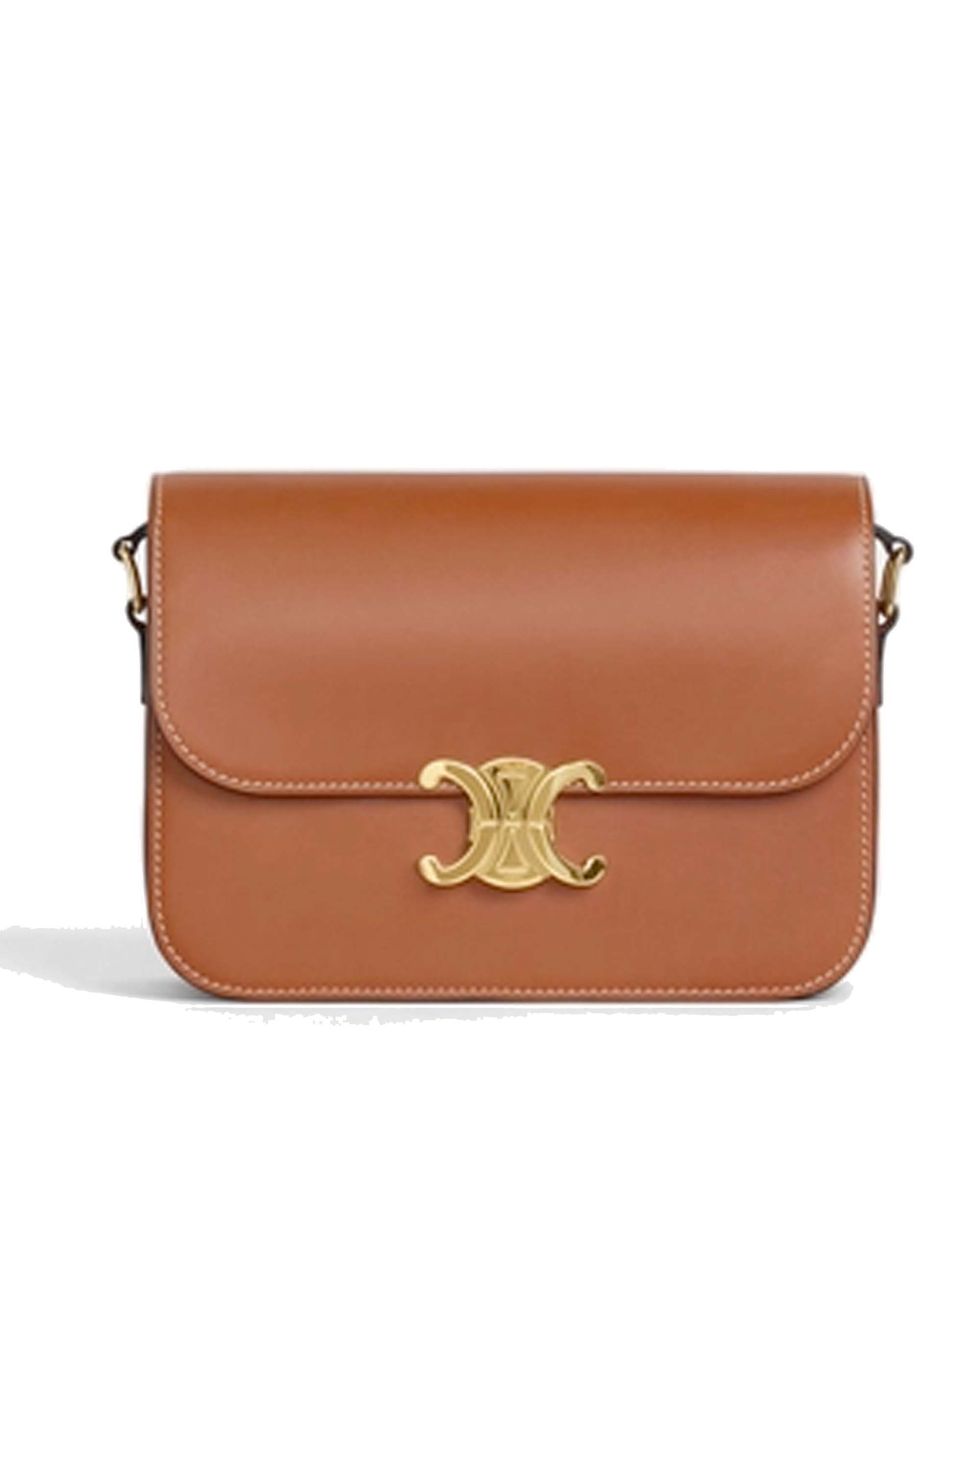 20 Best luxurious designer handbags and purses that you should buy right  now